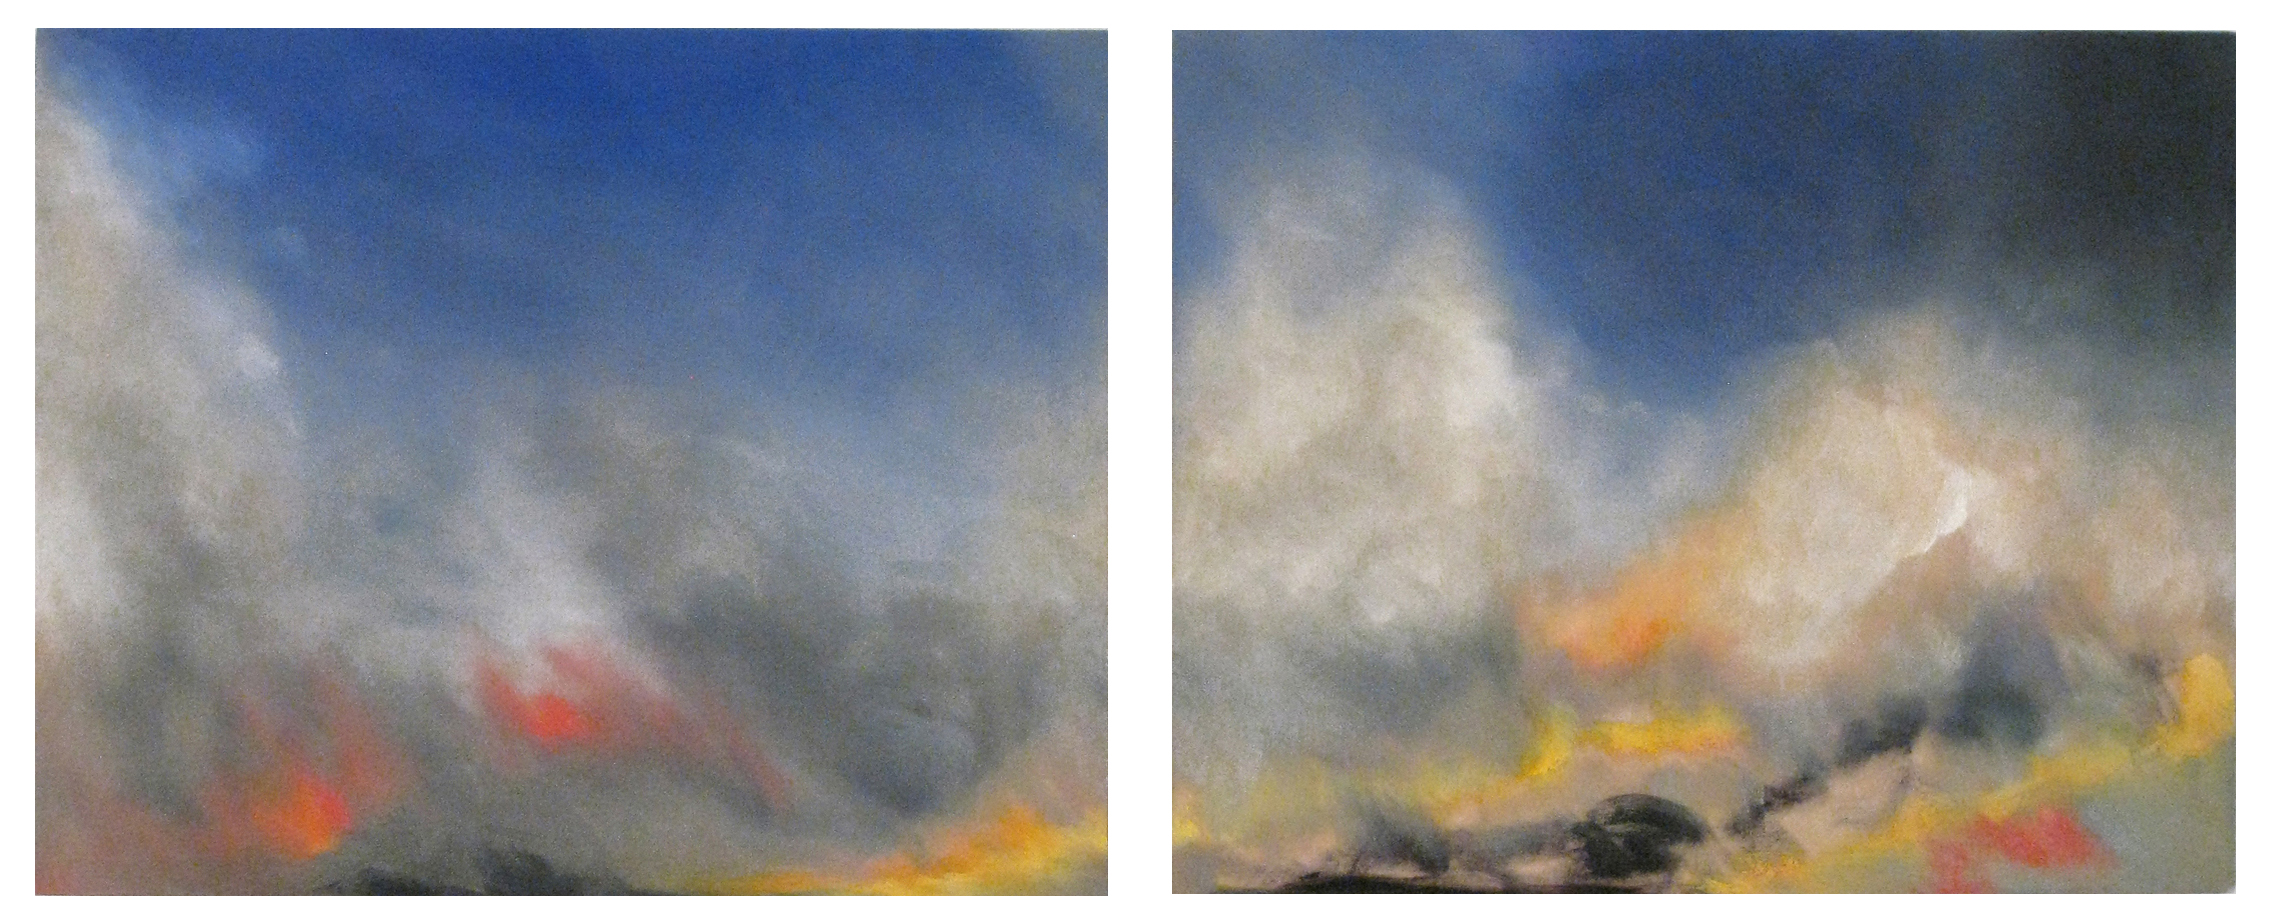  wildfire, 2015  oil on panel  10 x 24 in 